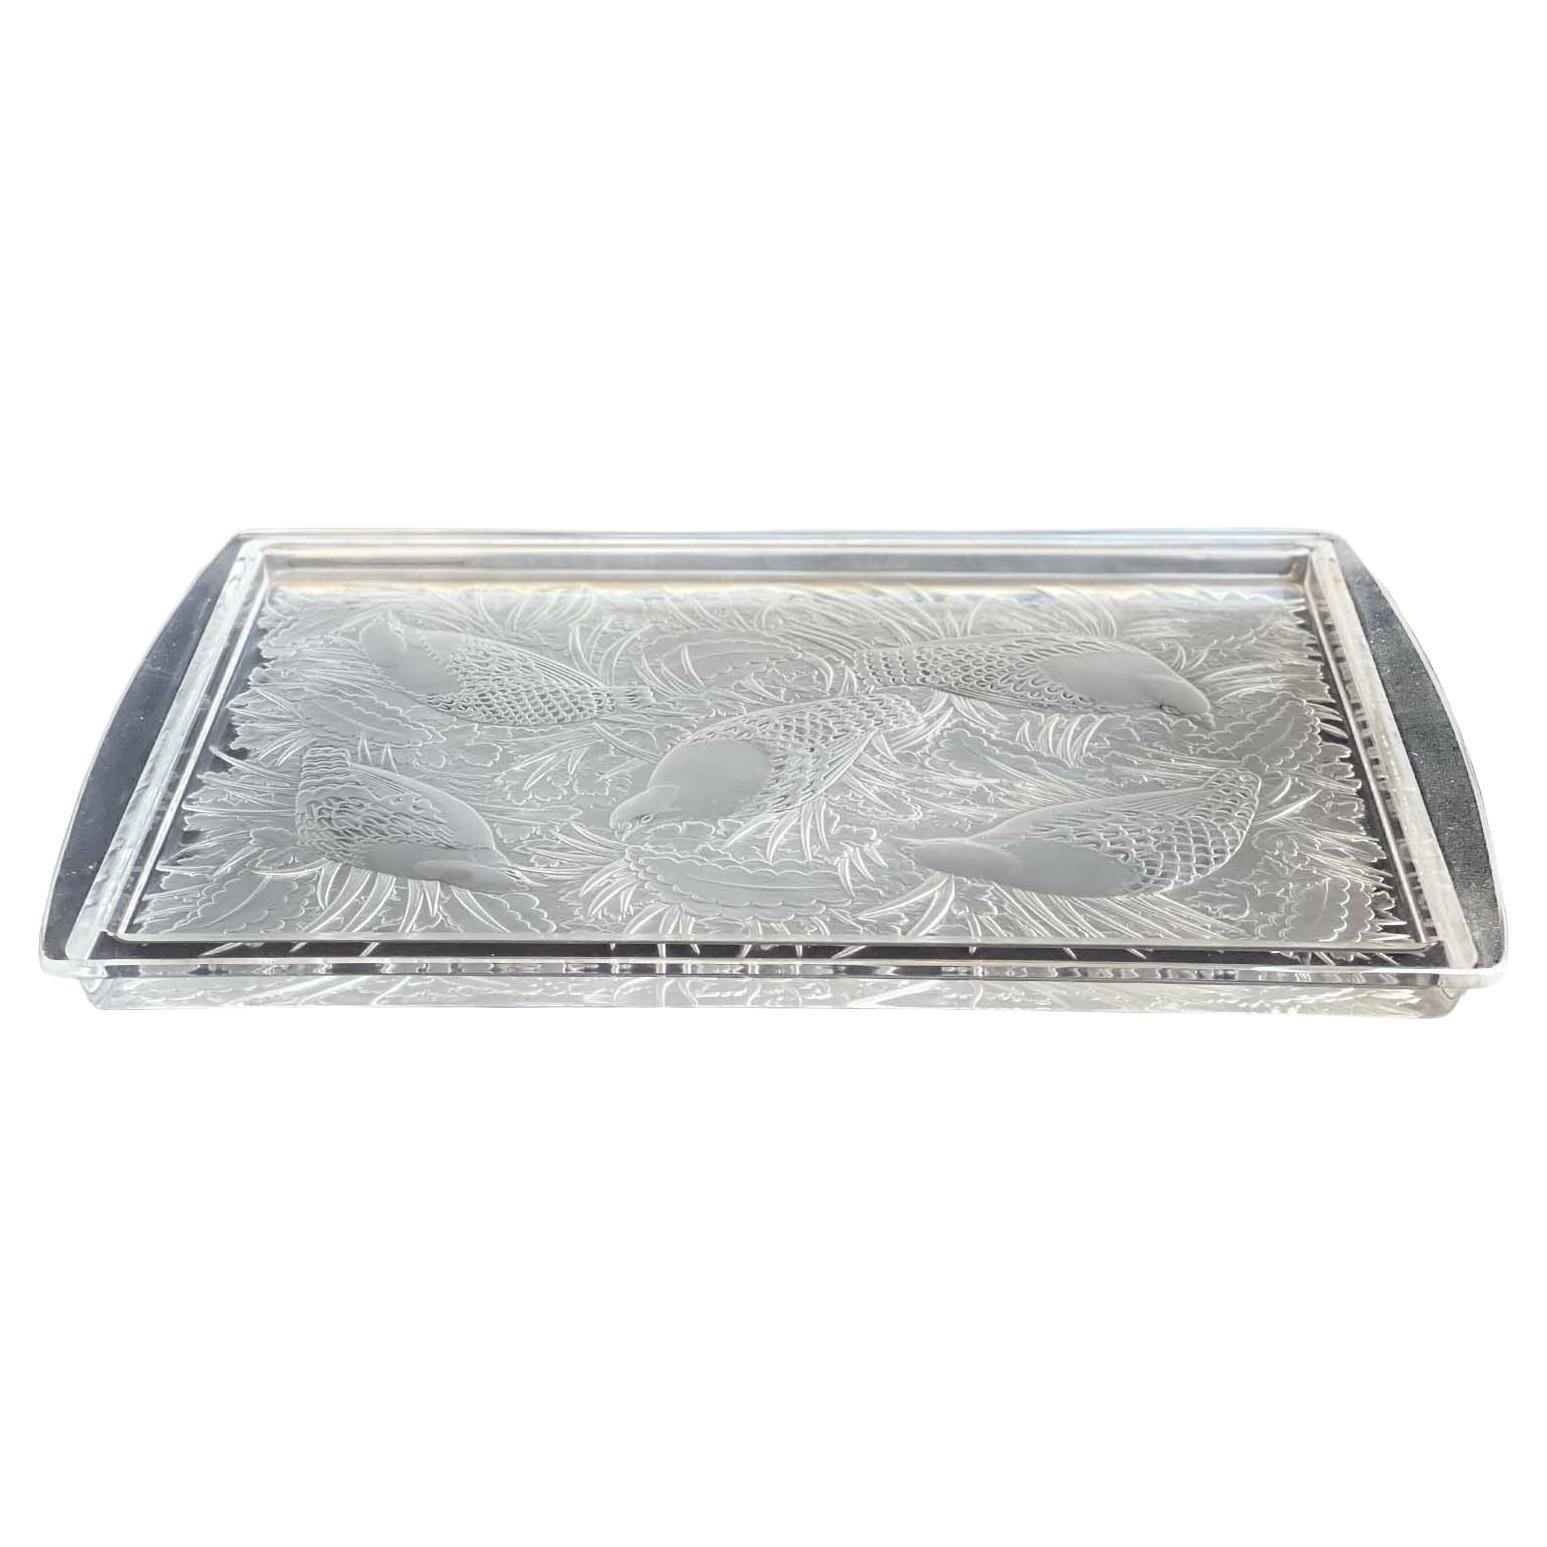 Lalique "Perdrix" Plateau Crystal Tray For Sale